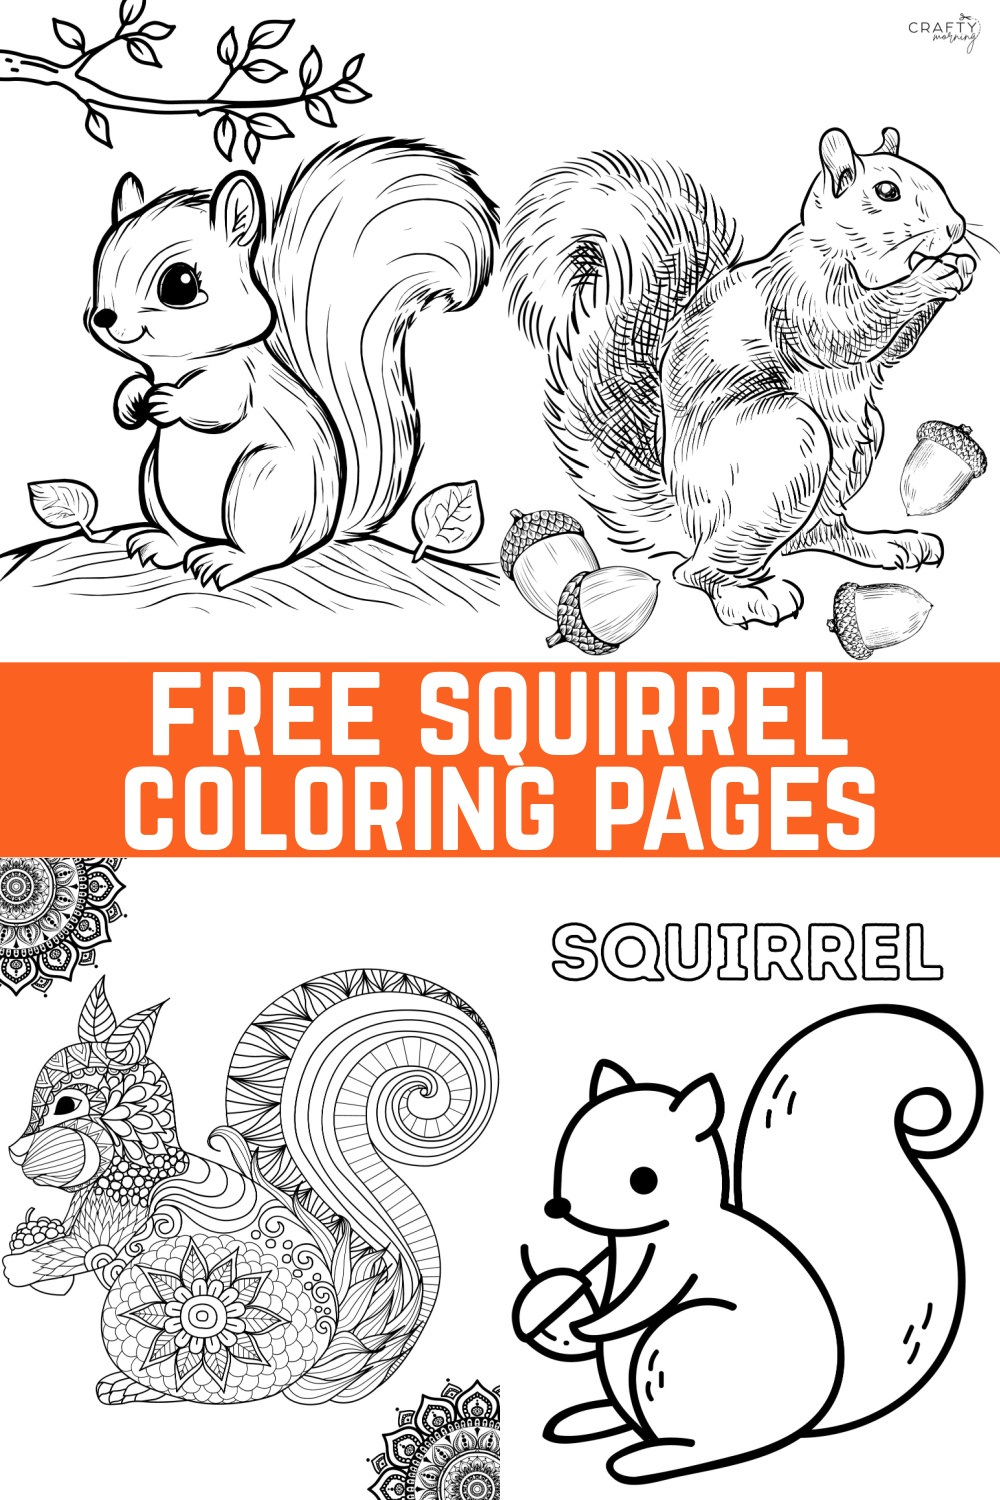 Squirrel Coloring Pages To Print - Crafty Morning - Free Printable Squirrel Pictures